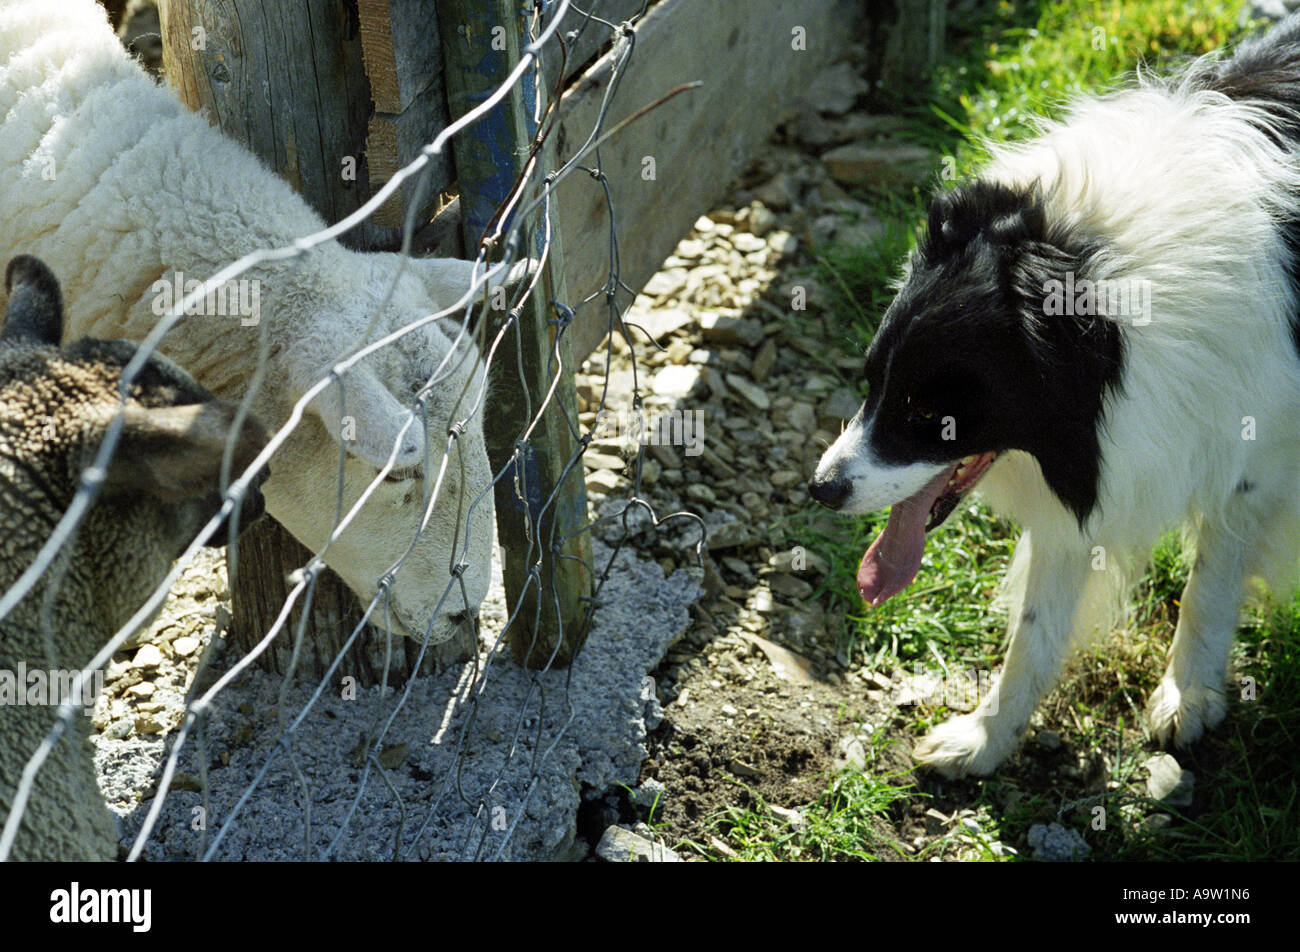 Sheepdog and sheep come face to face during a shearing on the island of Fair Isle, off the Scottish coast. Stock Photo